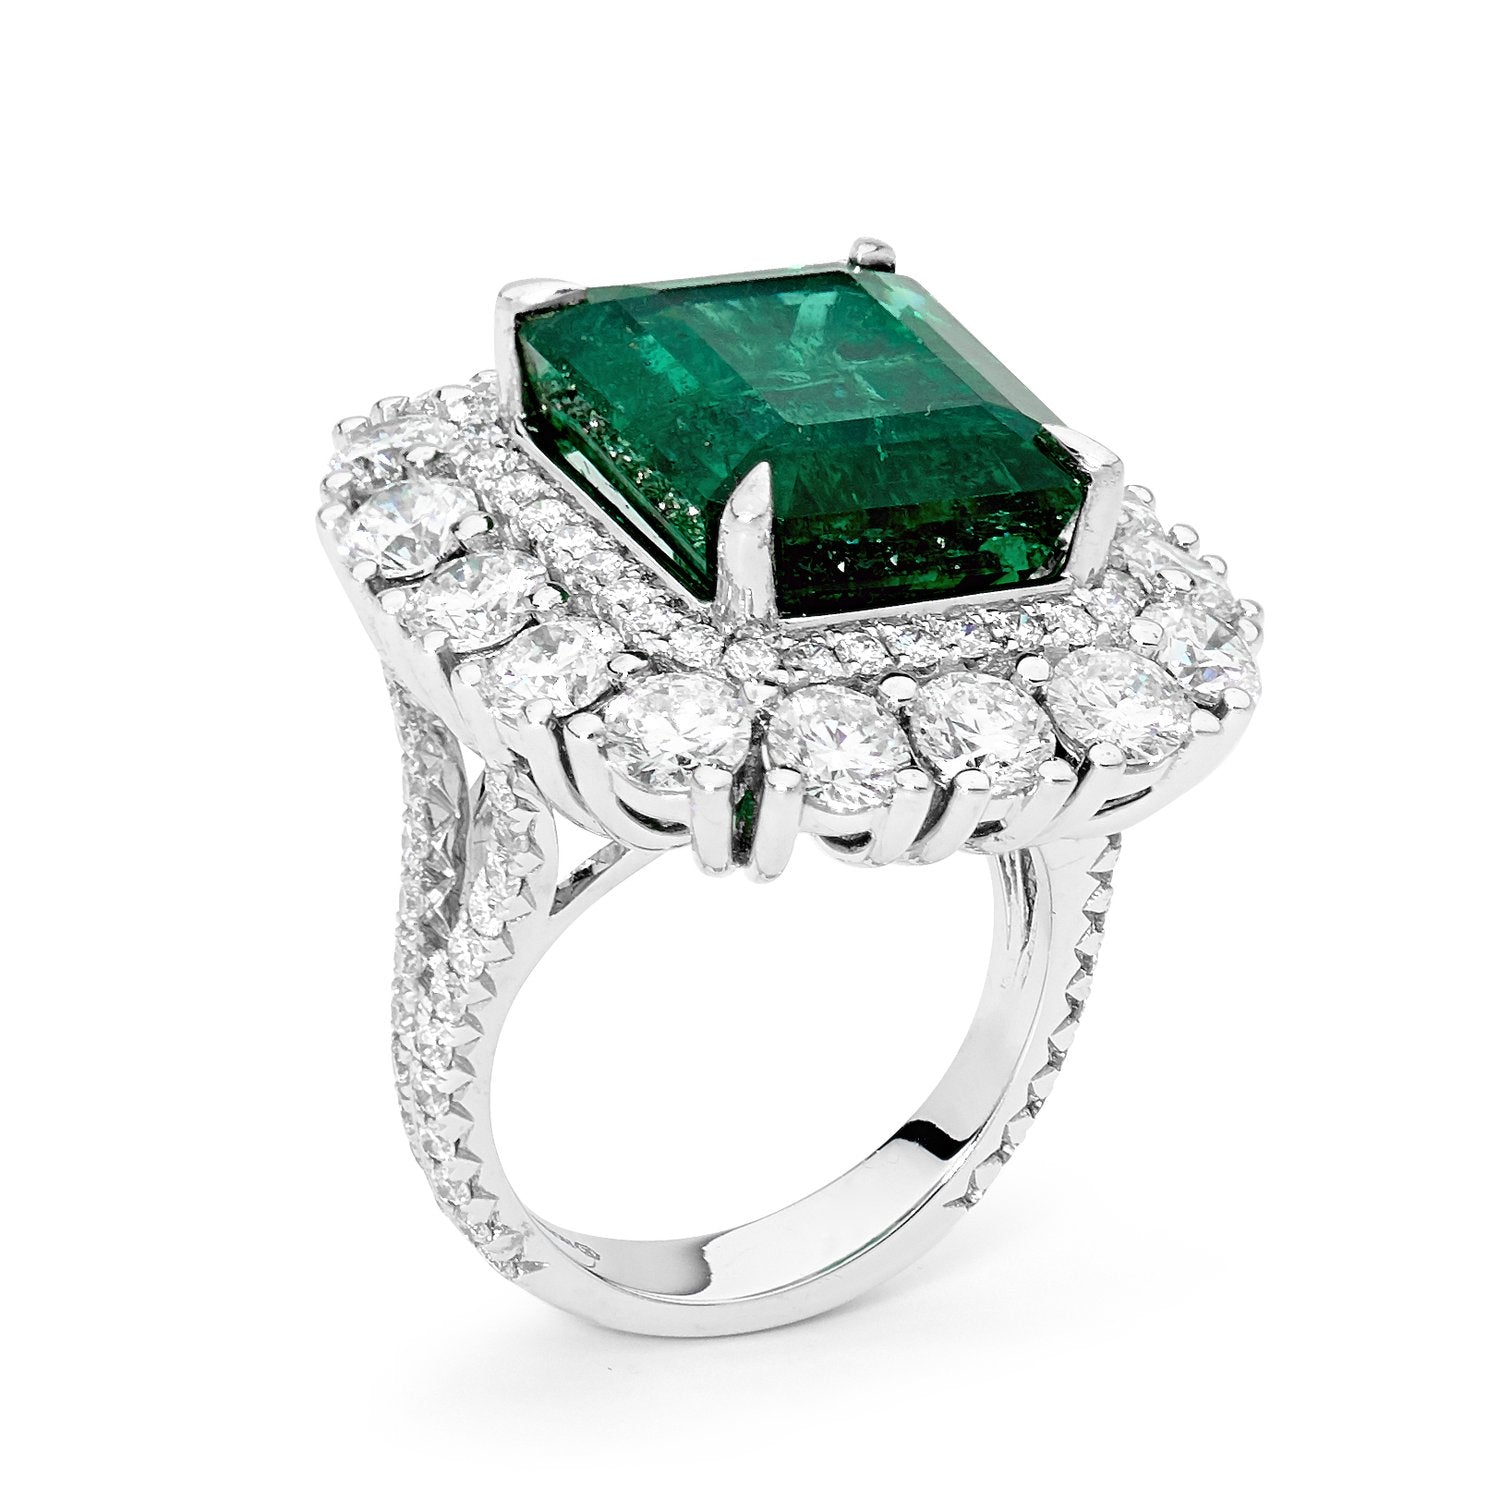 House of K'dor Emerald Rings Colombian Emerald Ring Jewellery